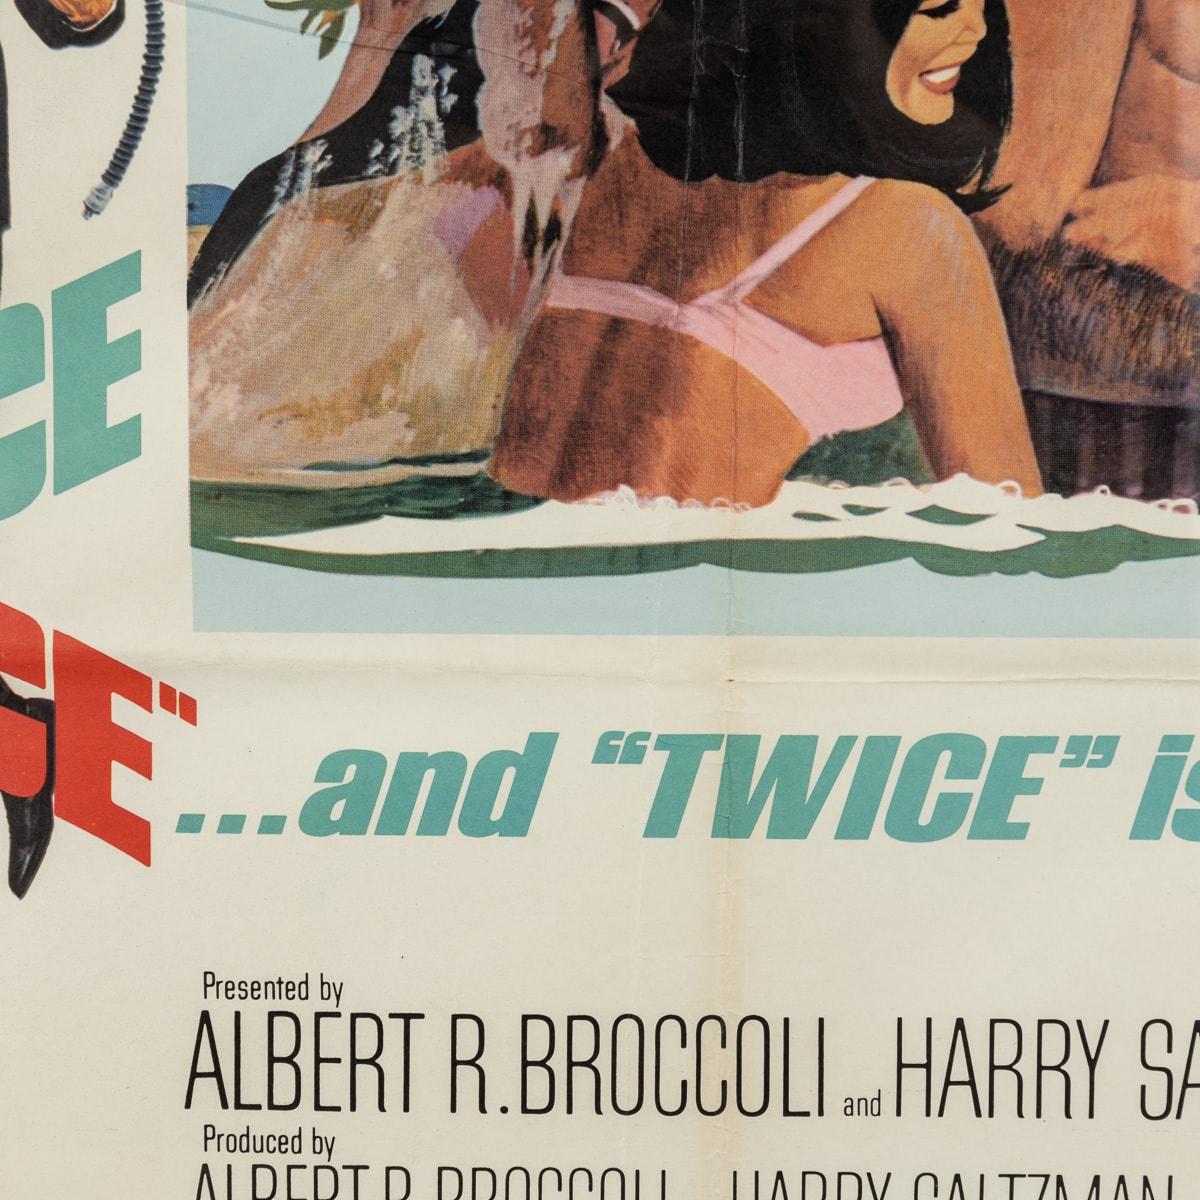 Original U.S Release James Bond 007 'You Only Live Twice' Subway C Poster c.1967 For Sale 11